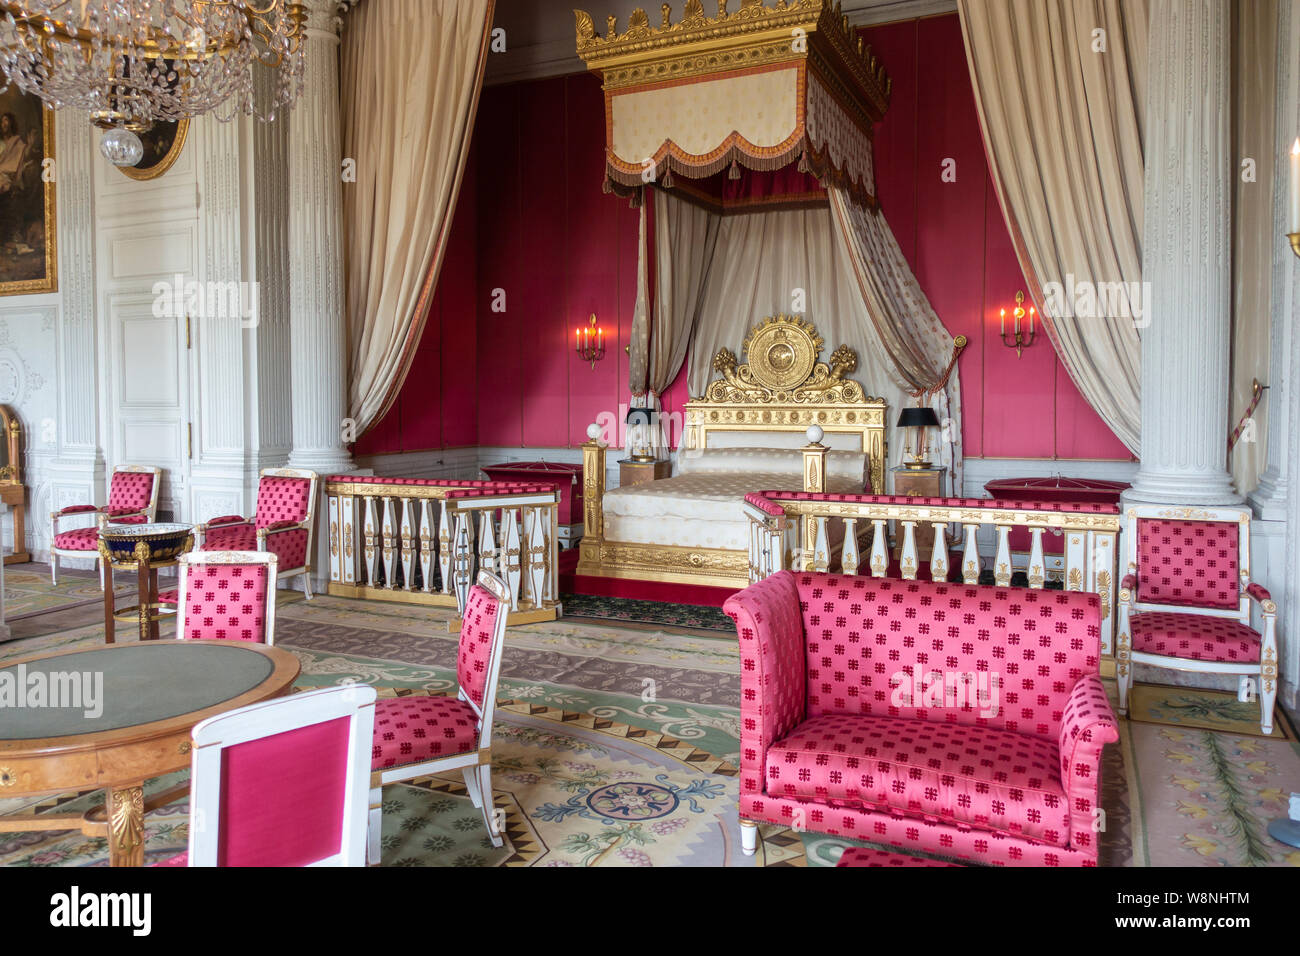 The Empress’ Bedchamber within The Grand Trianon Palace - Palace of Versailles, Yvelines, Île-de-France region of France Stock Photo